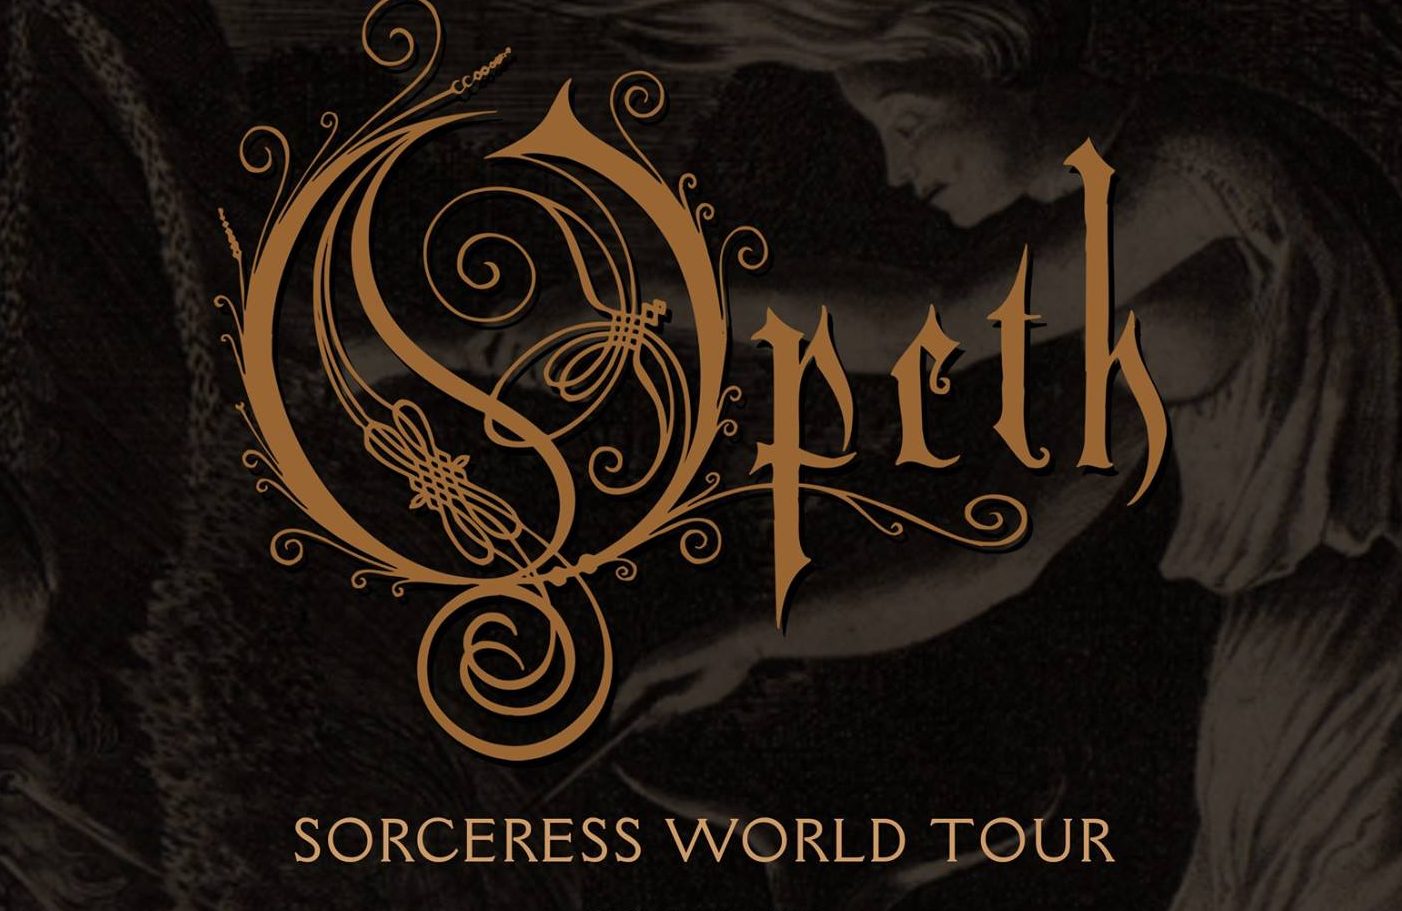 opeth tour tickets